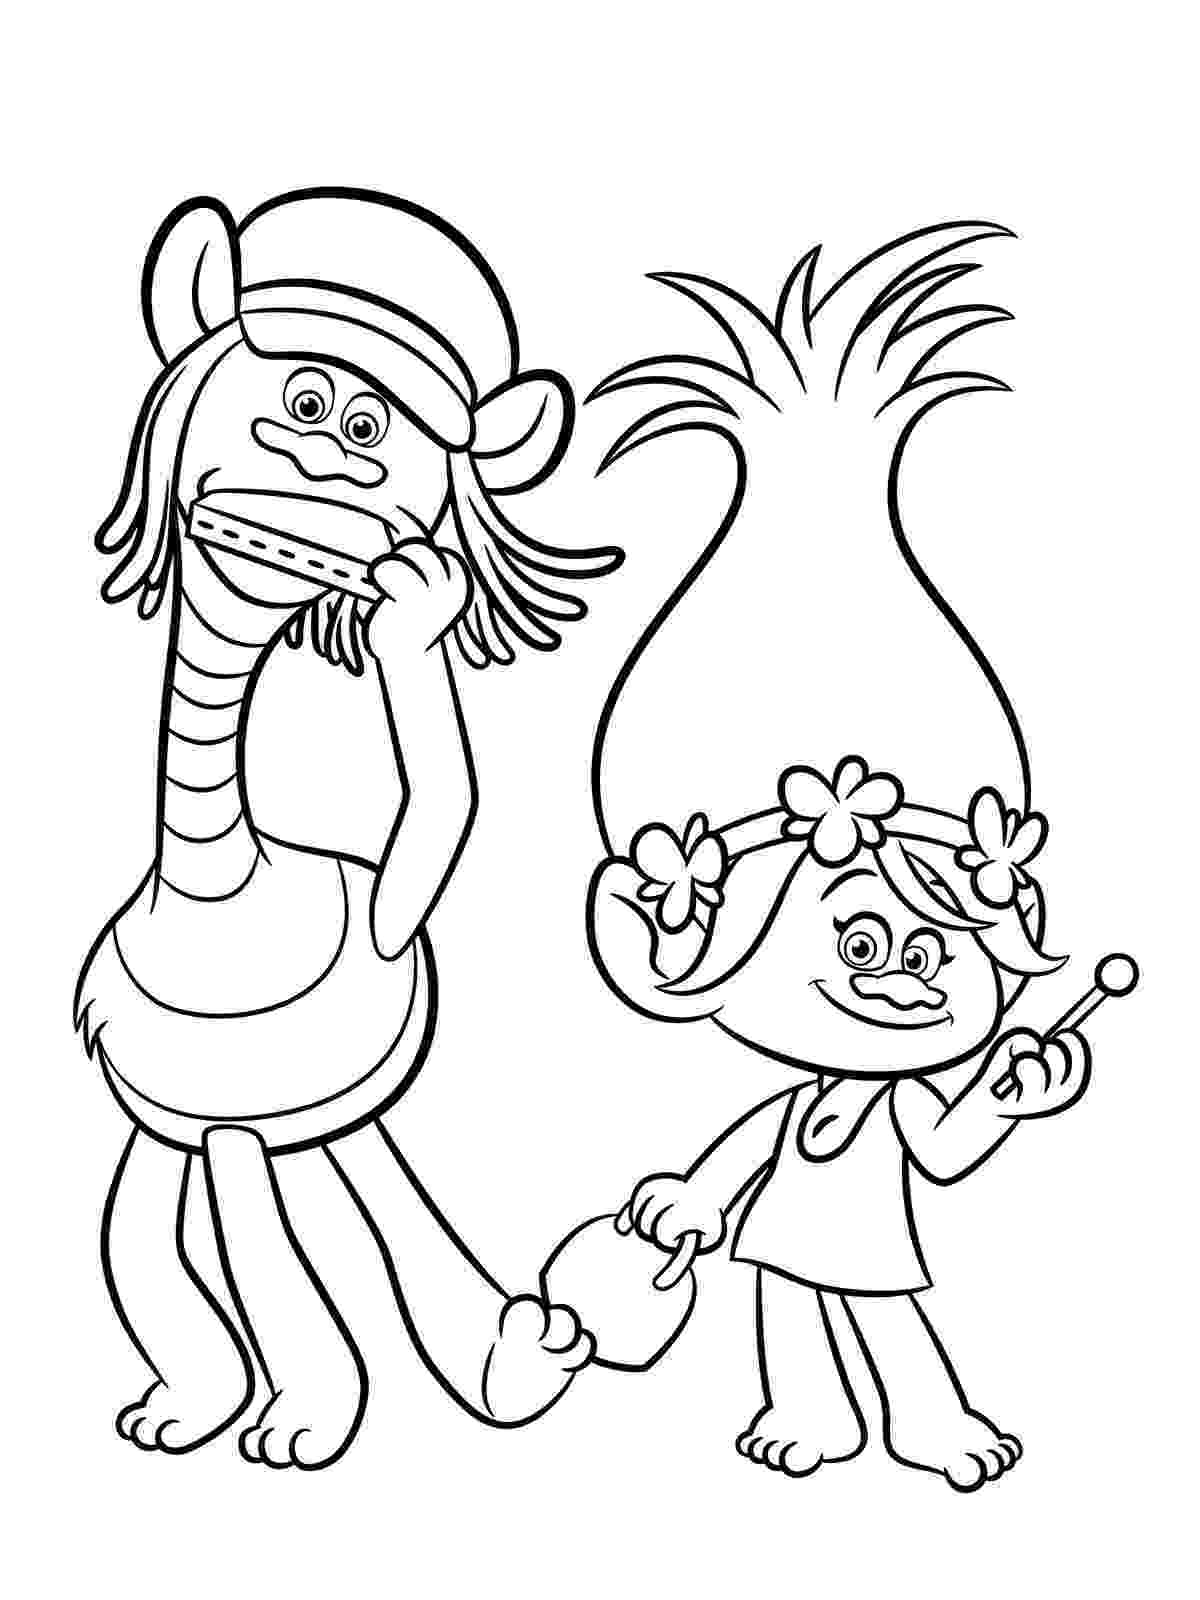 disney coloring pages online disney coloring pages best coloring pages for kids online disney pages coloring 